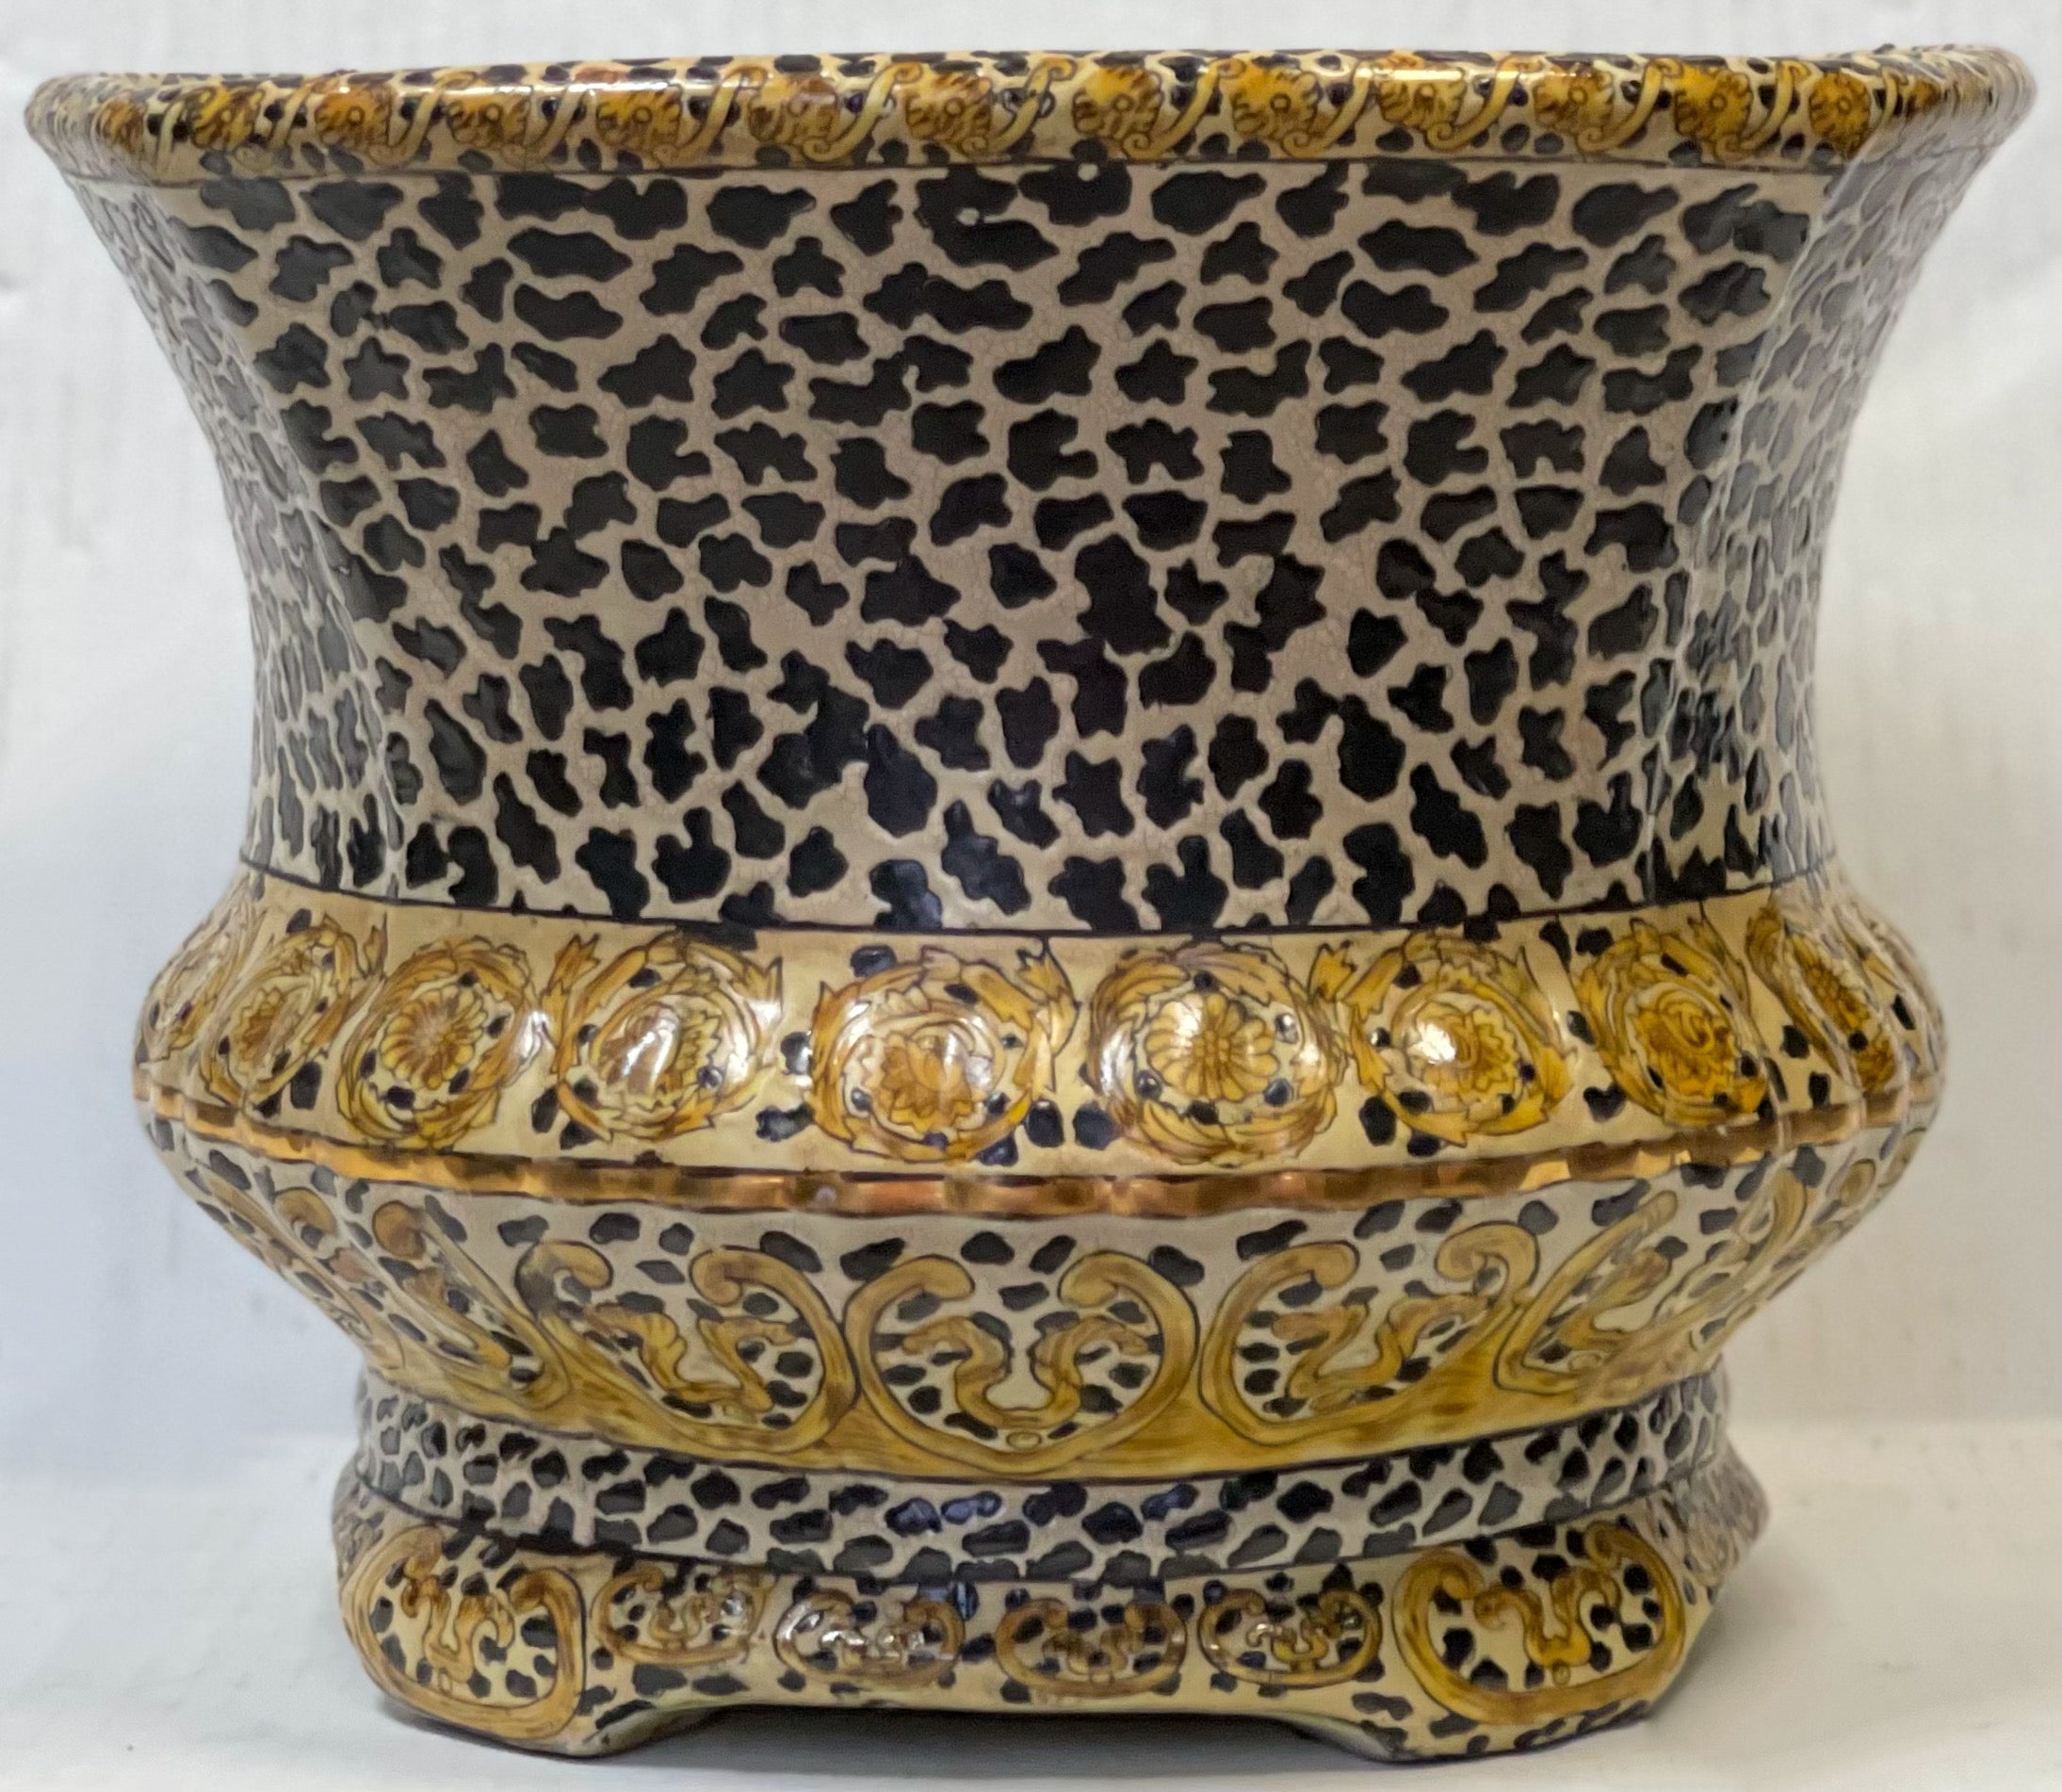 So fun and decorative. This is a large scale Chinese leopard motif planter. It could be used for a variety of things ranging from planter to ice bucket! It is ceramic and marked on the underside.